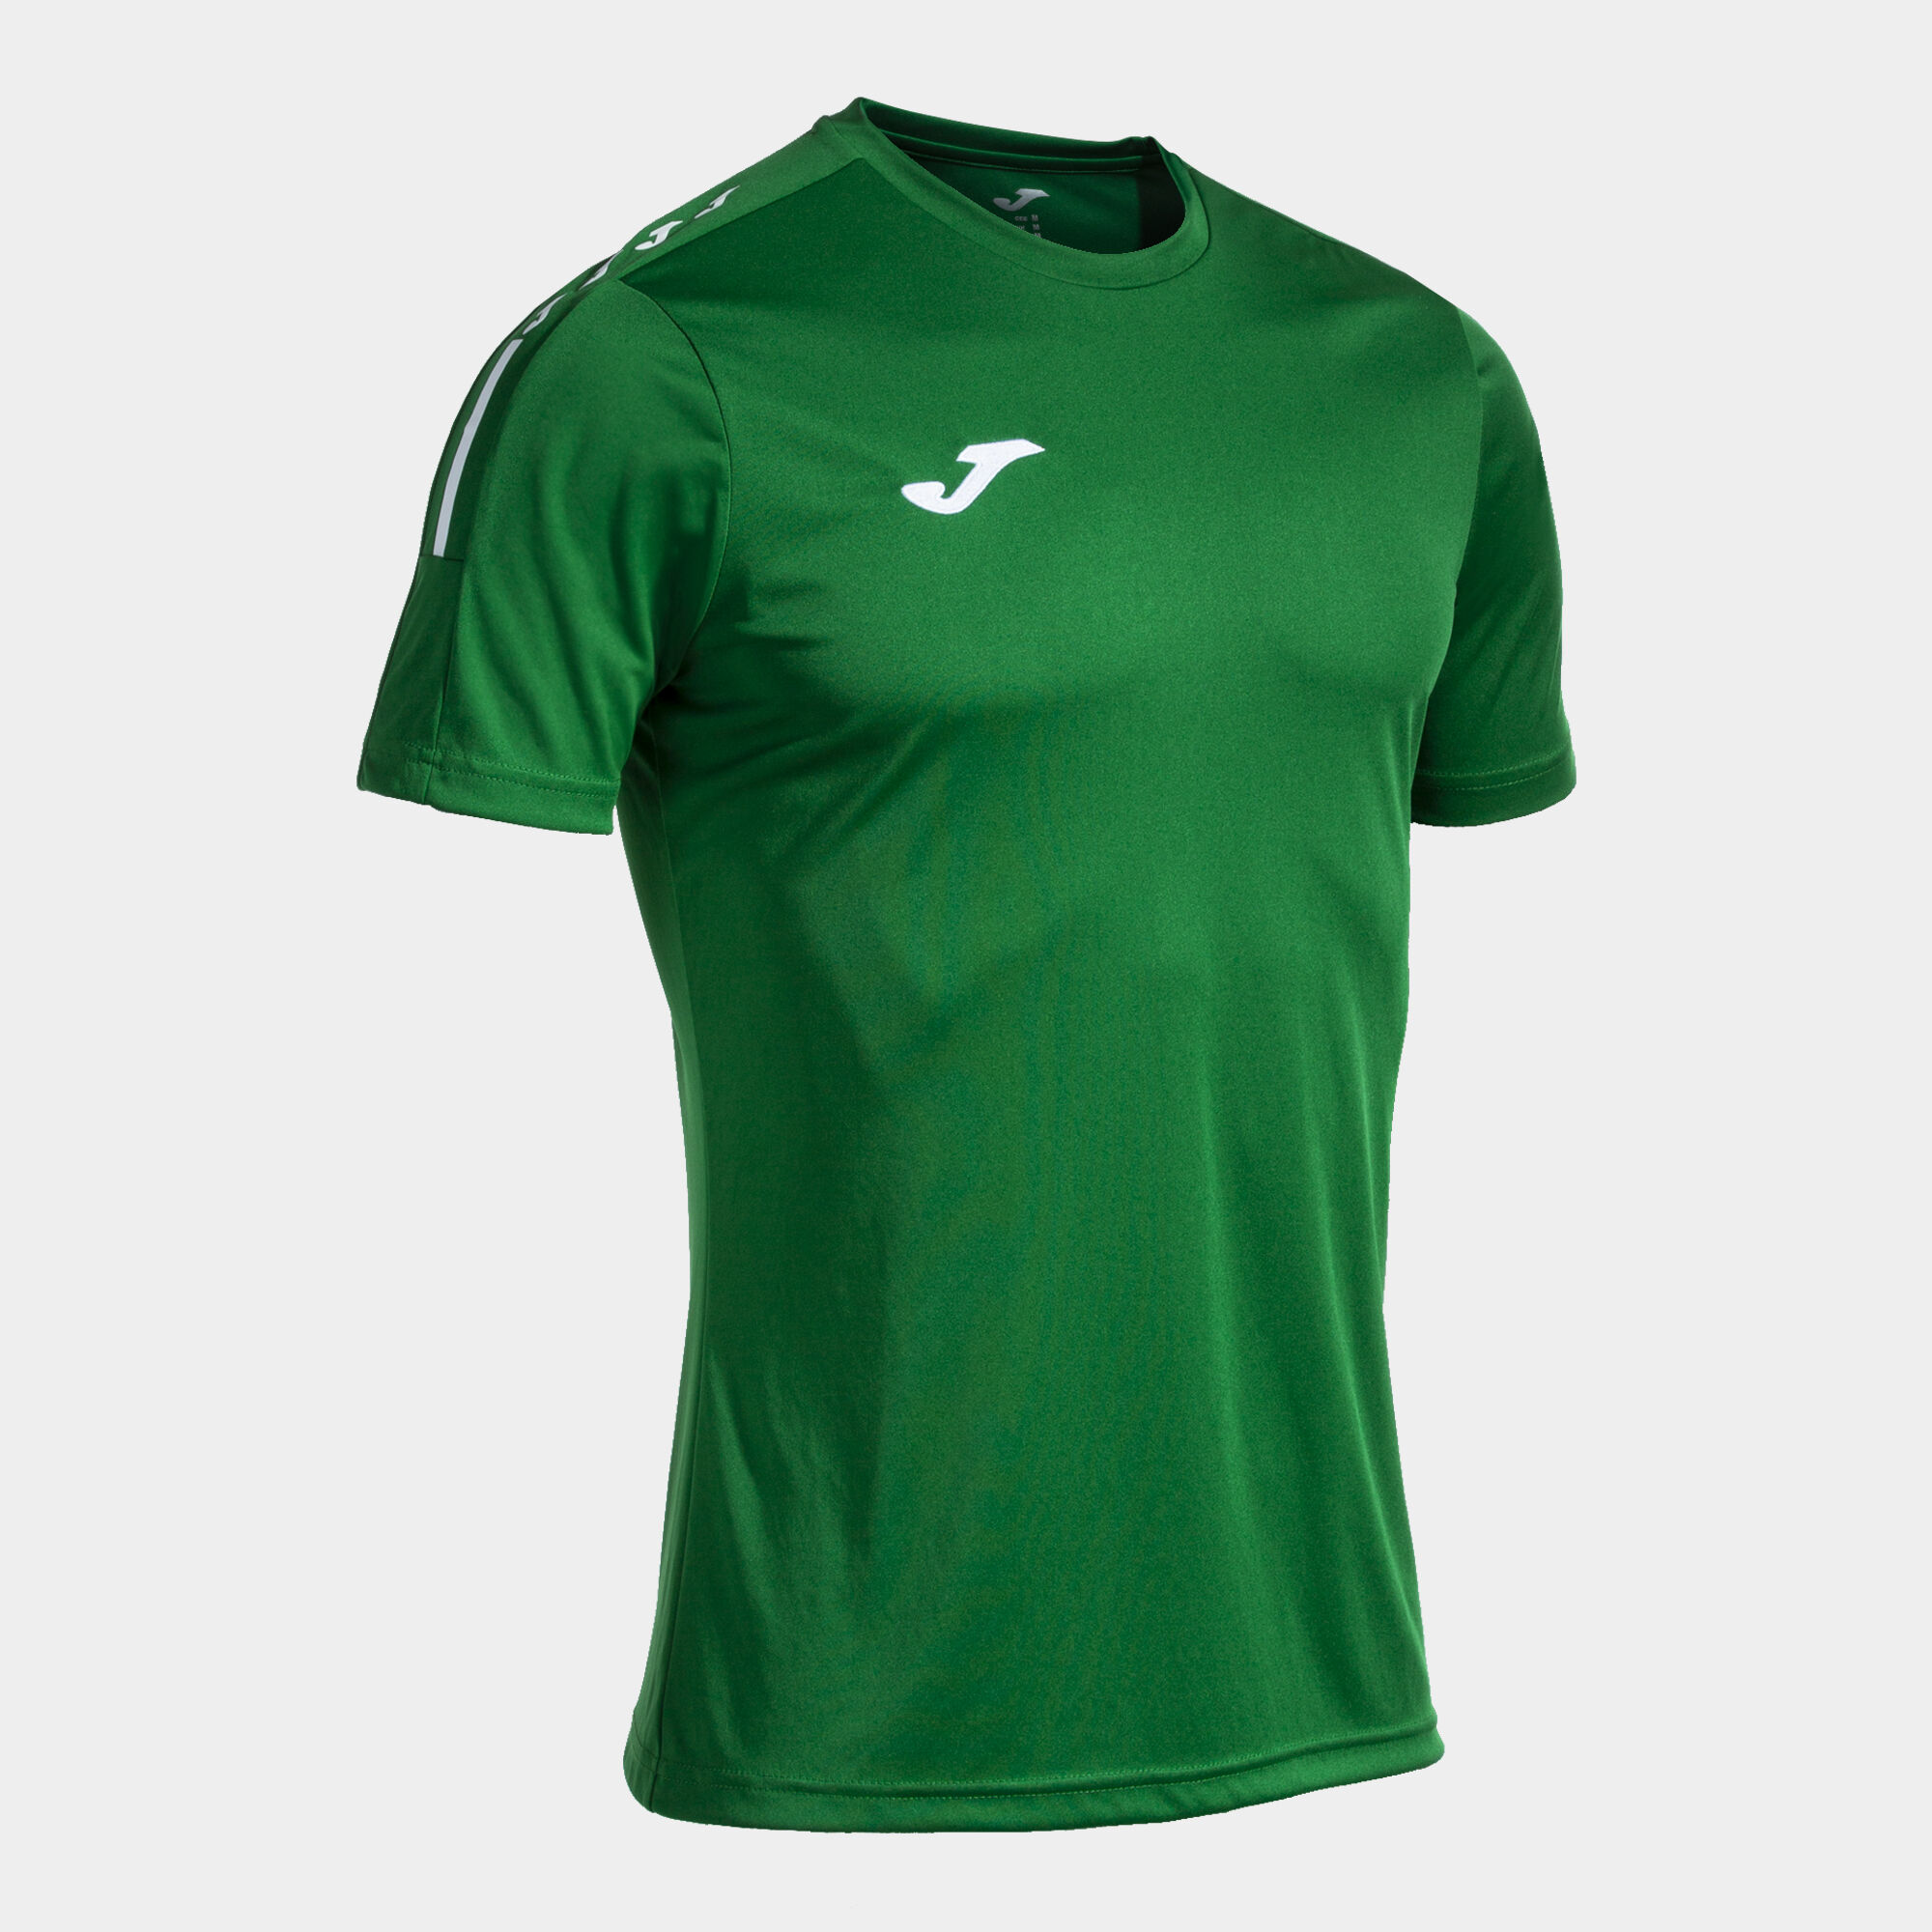 Maillot manches courtes homme Olimpiada vert